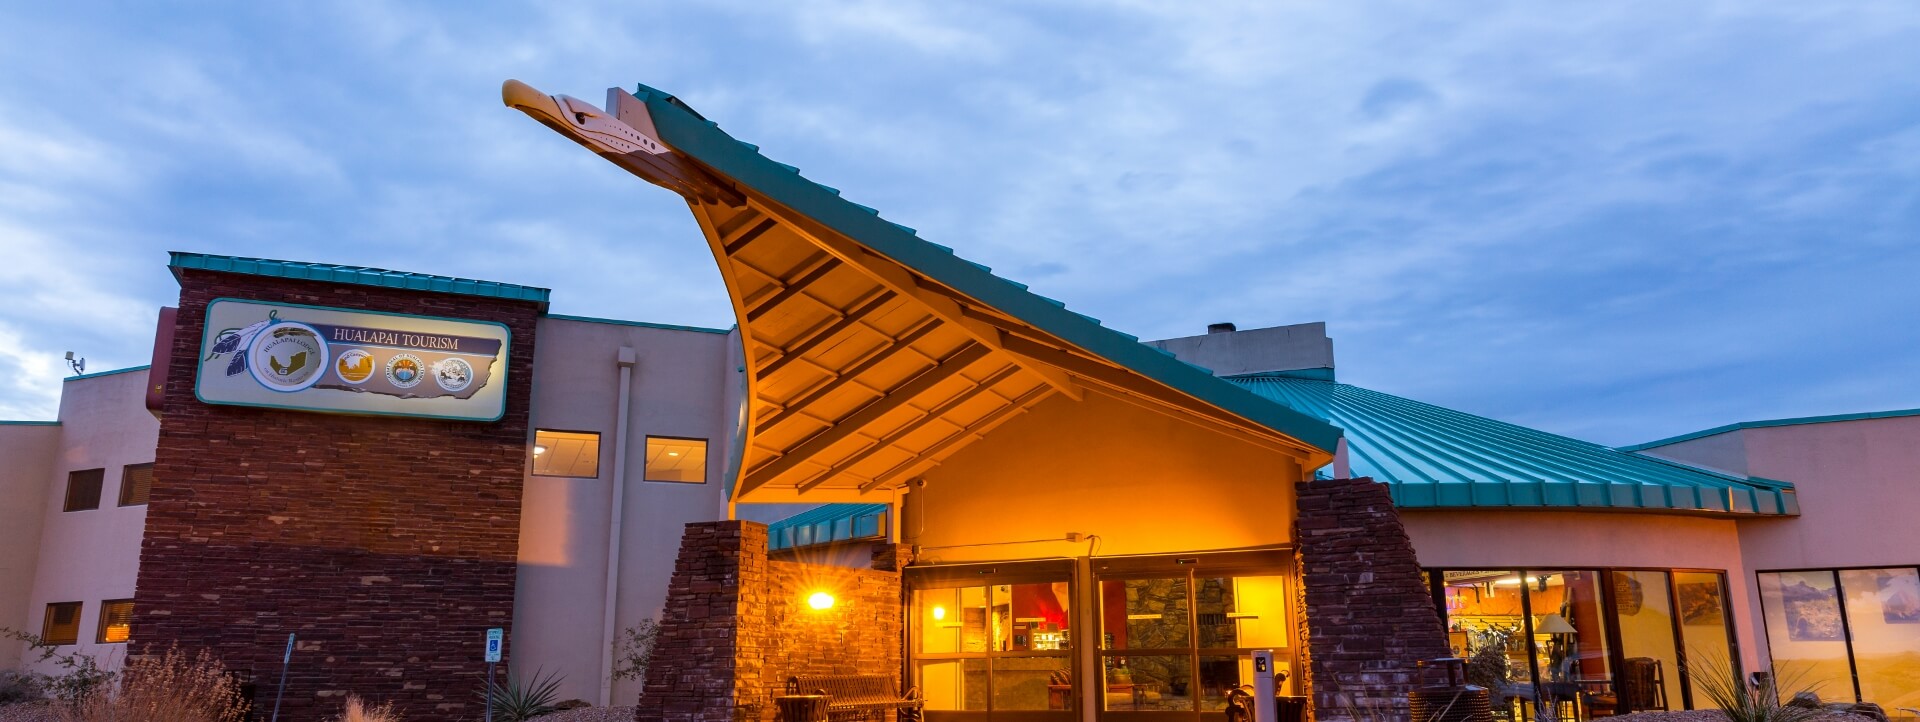 Grand Canyon West Hotels: The Hualapai Lodge